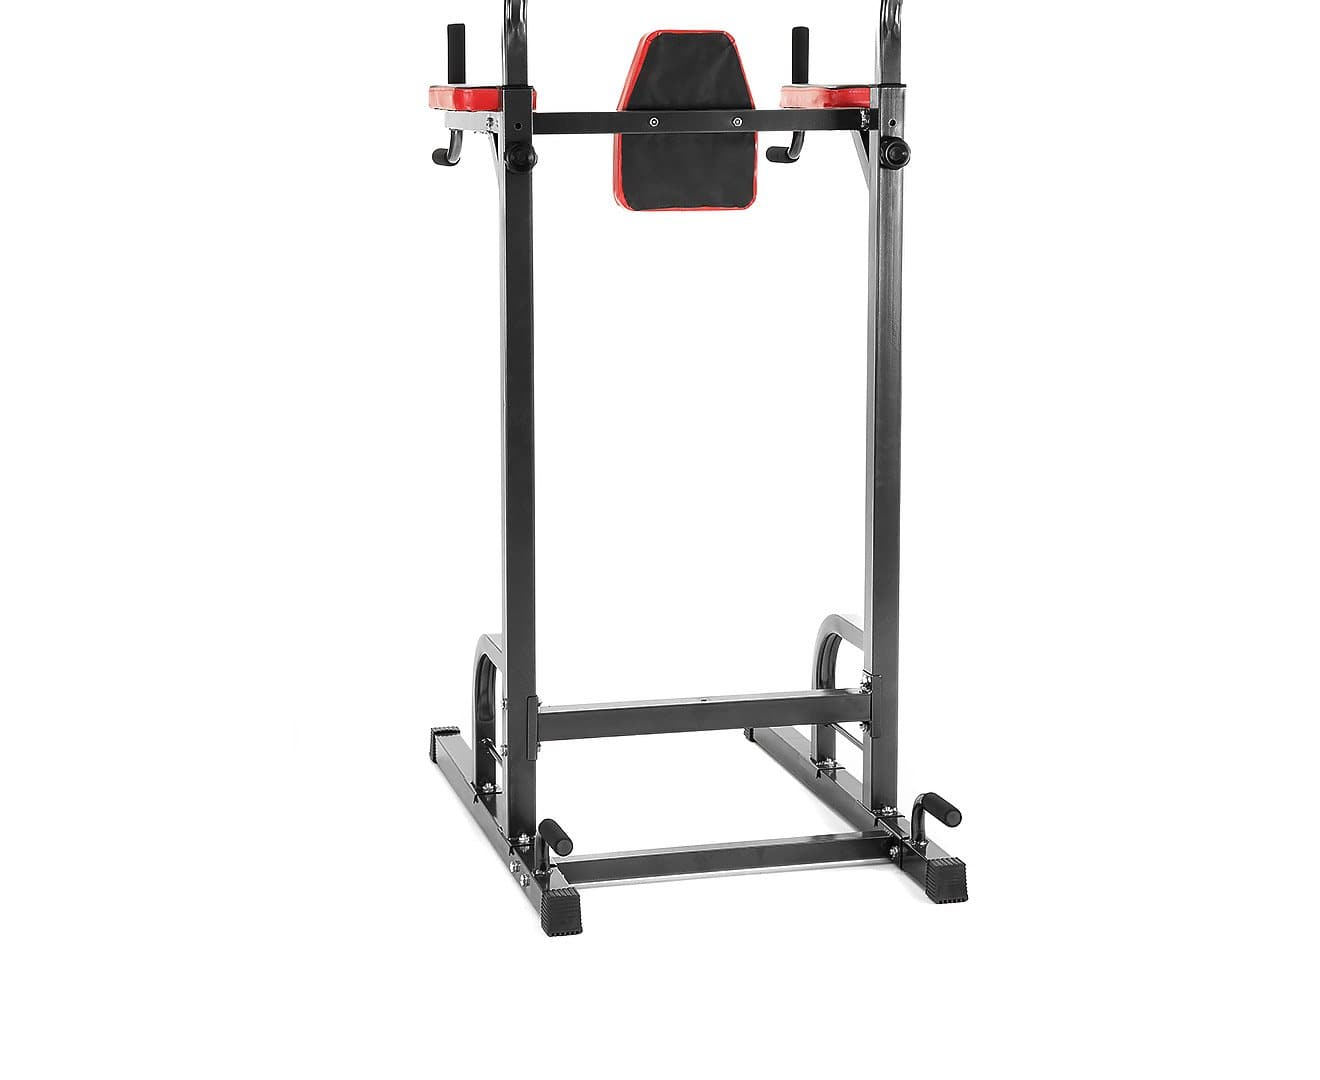 Fatherday-sports and fitness Powertrain Multi Station Home Gym Chin-up Pull-up Tower